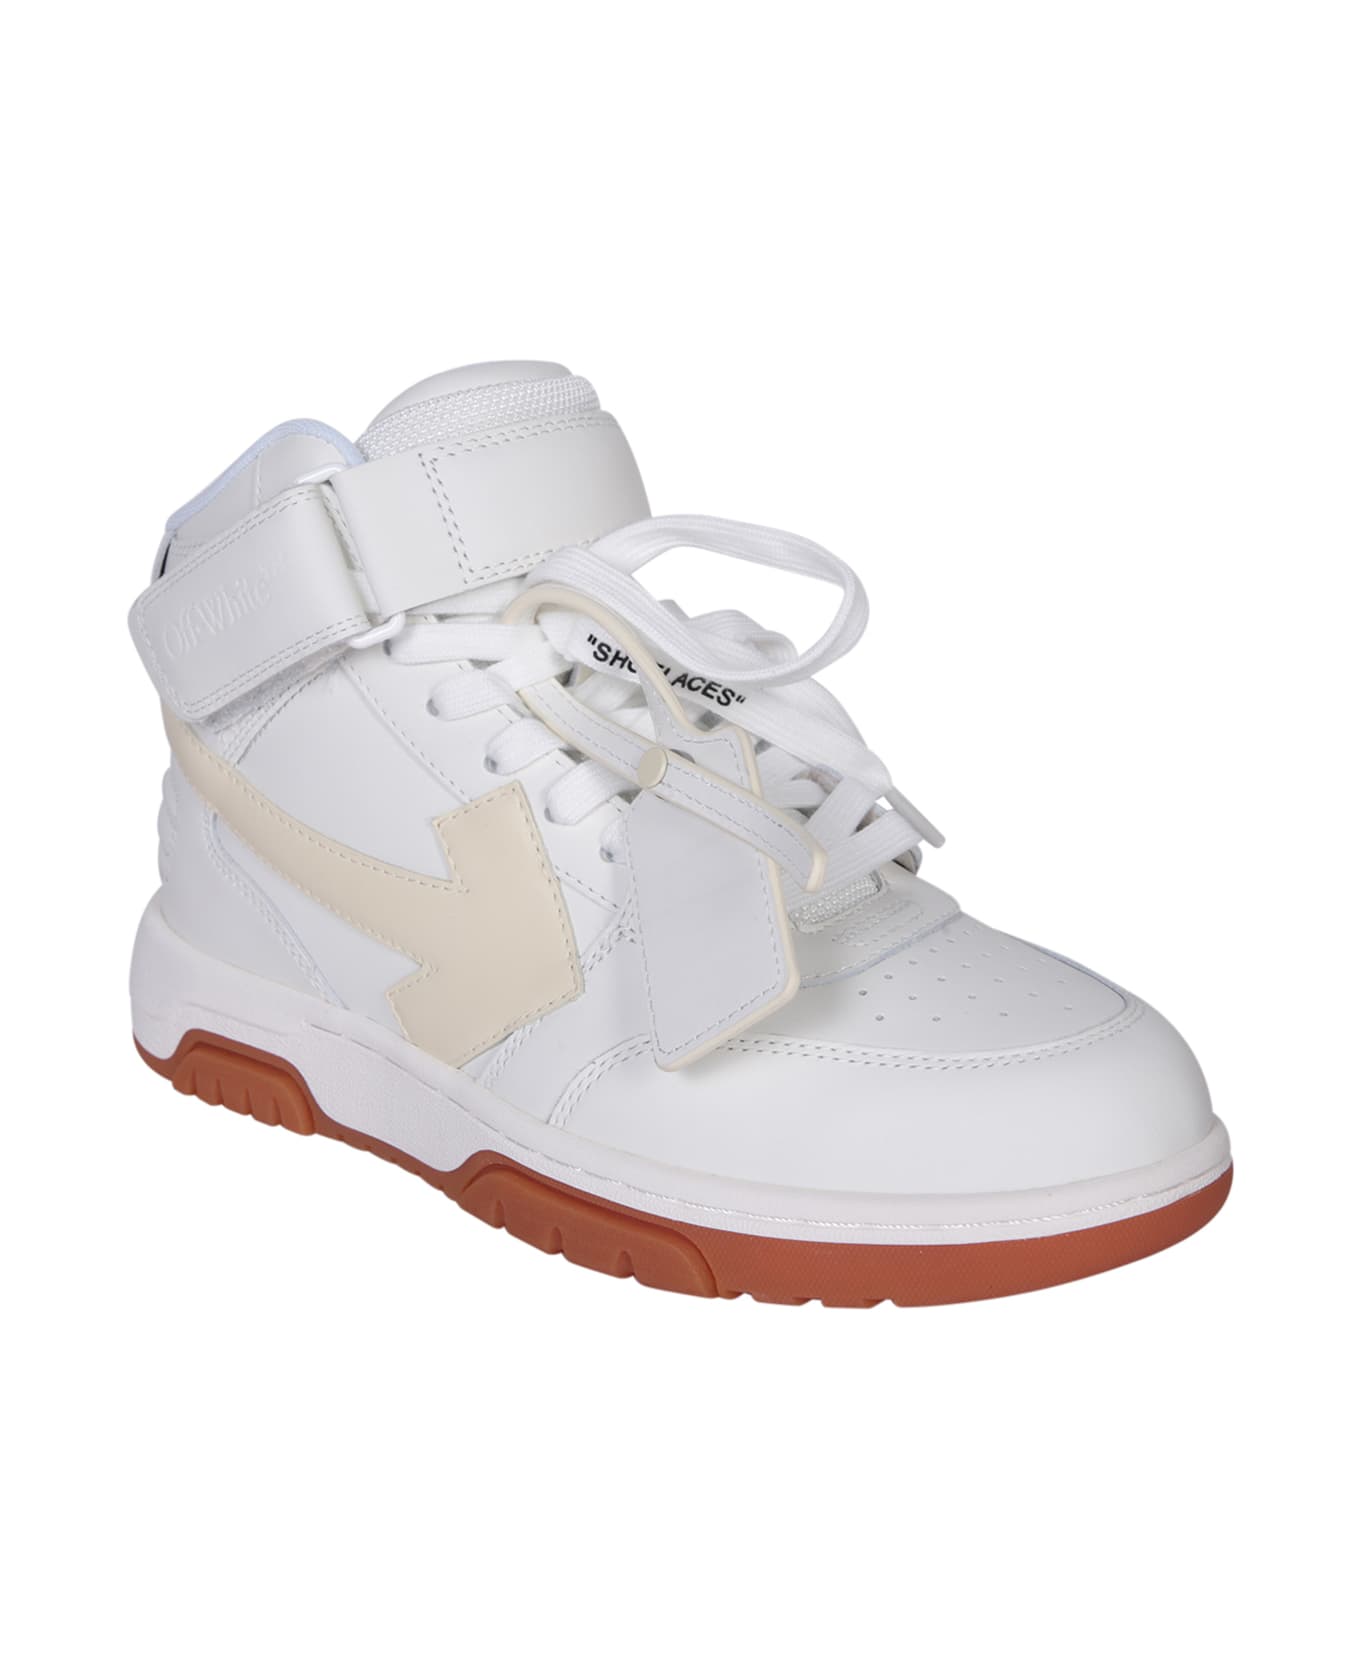 Off-White Lace-up Sneakers - White スニーカー